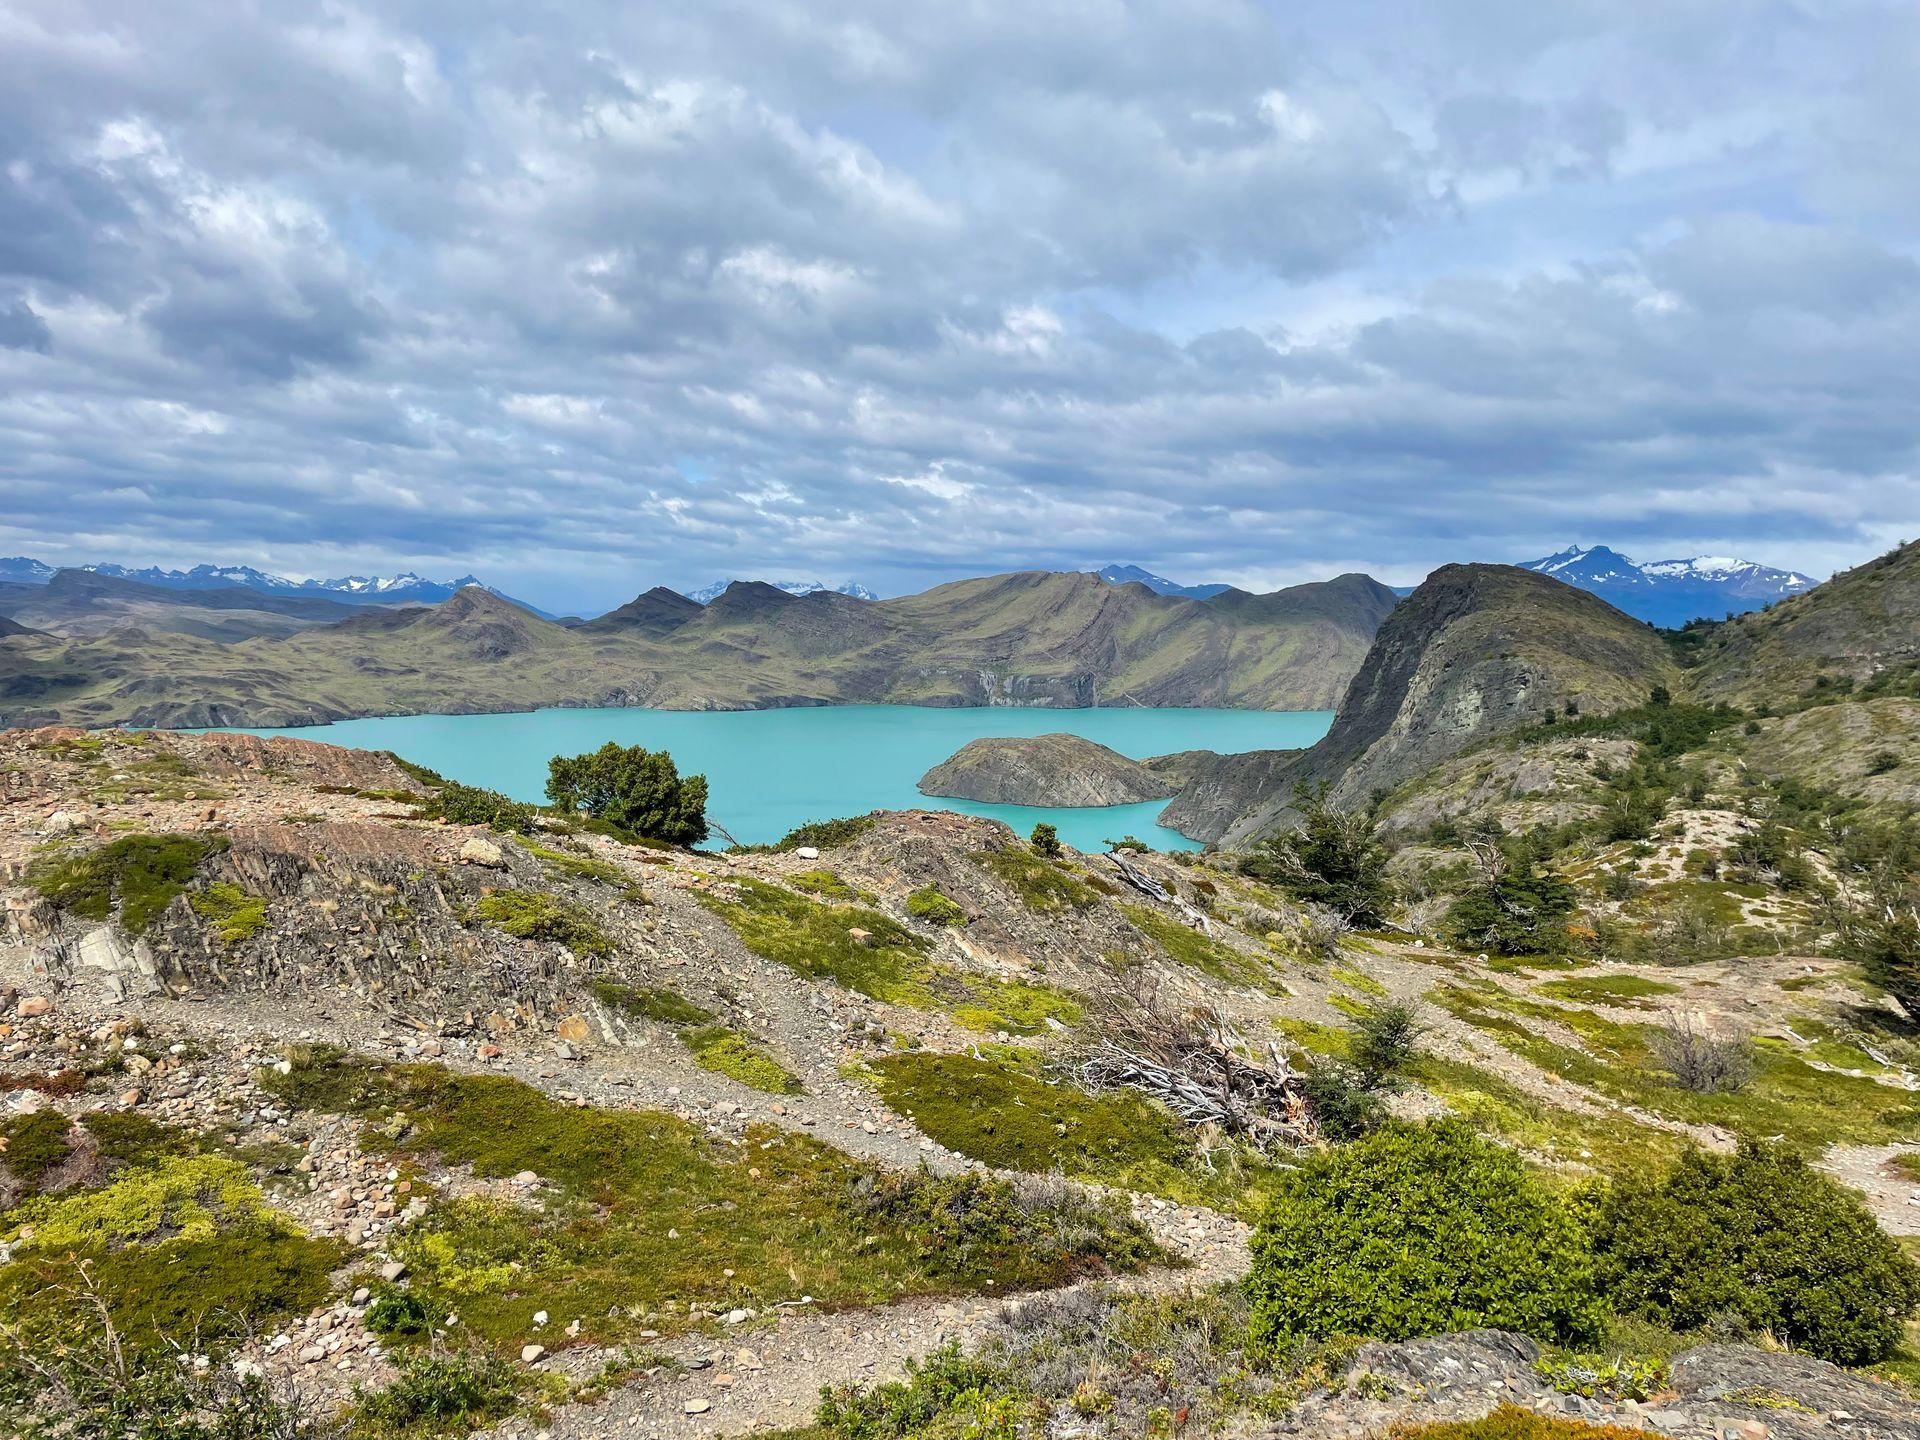 A bright blue lake surrounded by mountains. There is a mix of greenery and rocky areas across the mountainous landscape.